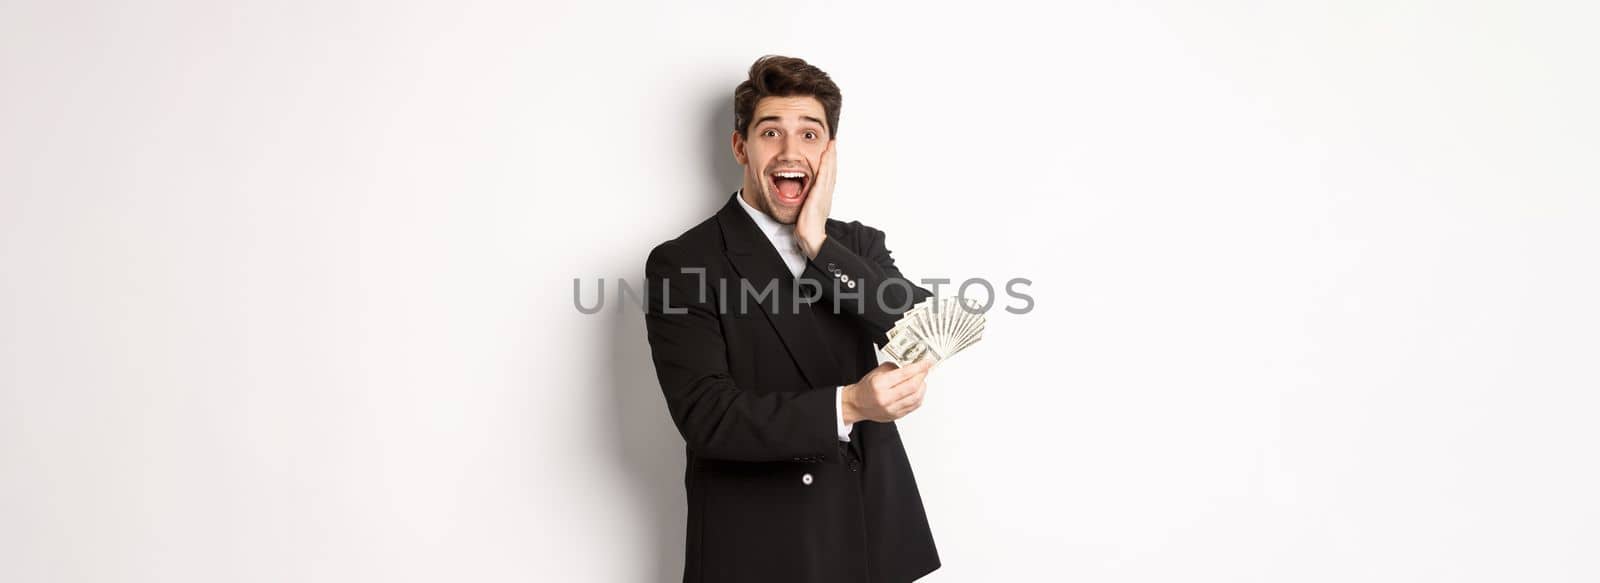 Image of rich and happy man in black suit, winning prize, holding money and looking excited at camera, standing over white background.